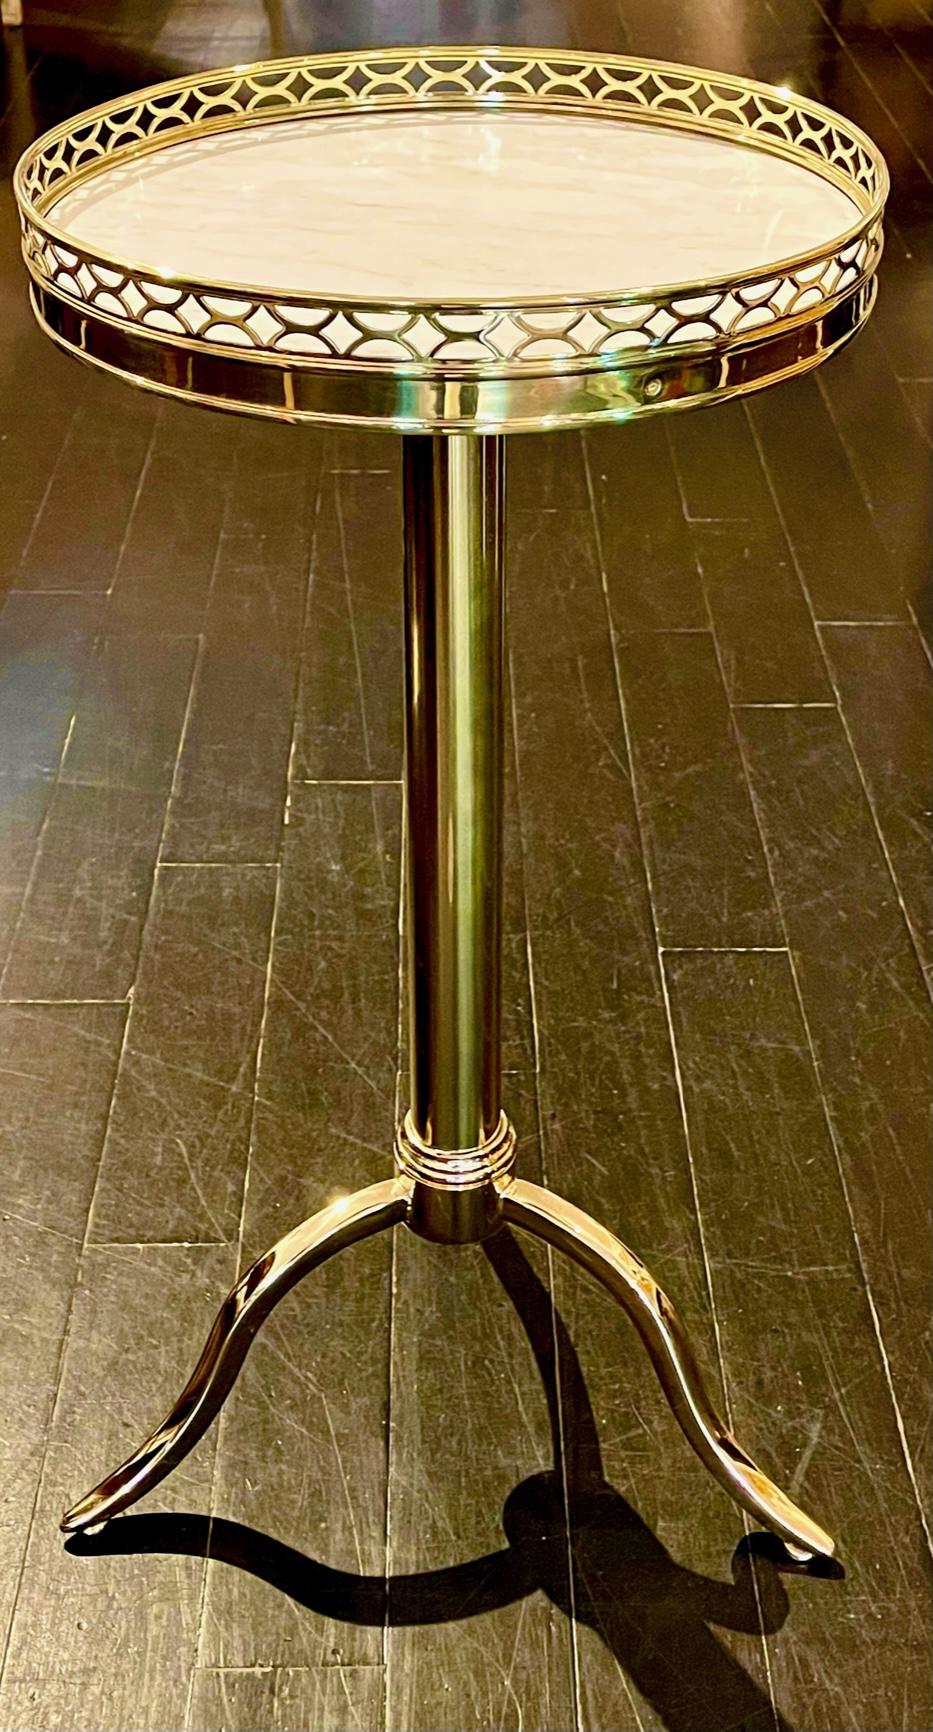 French Bronze Telescopic Guéridon side tables in the Manner of Maison Toulouse. Mid-Century Modern. The very quintescence of chic.

Magnificent bronze end table with bronze galerie surrounding a white and grey marble top and telescoping tripod